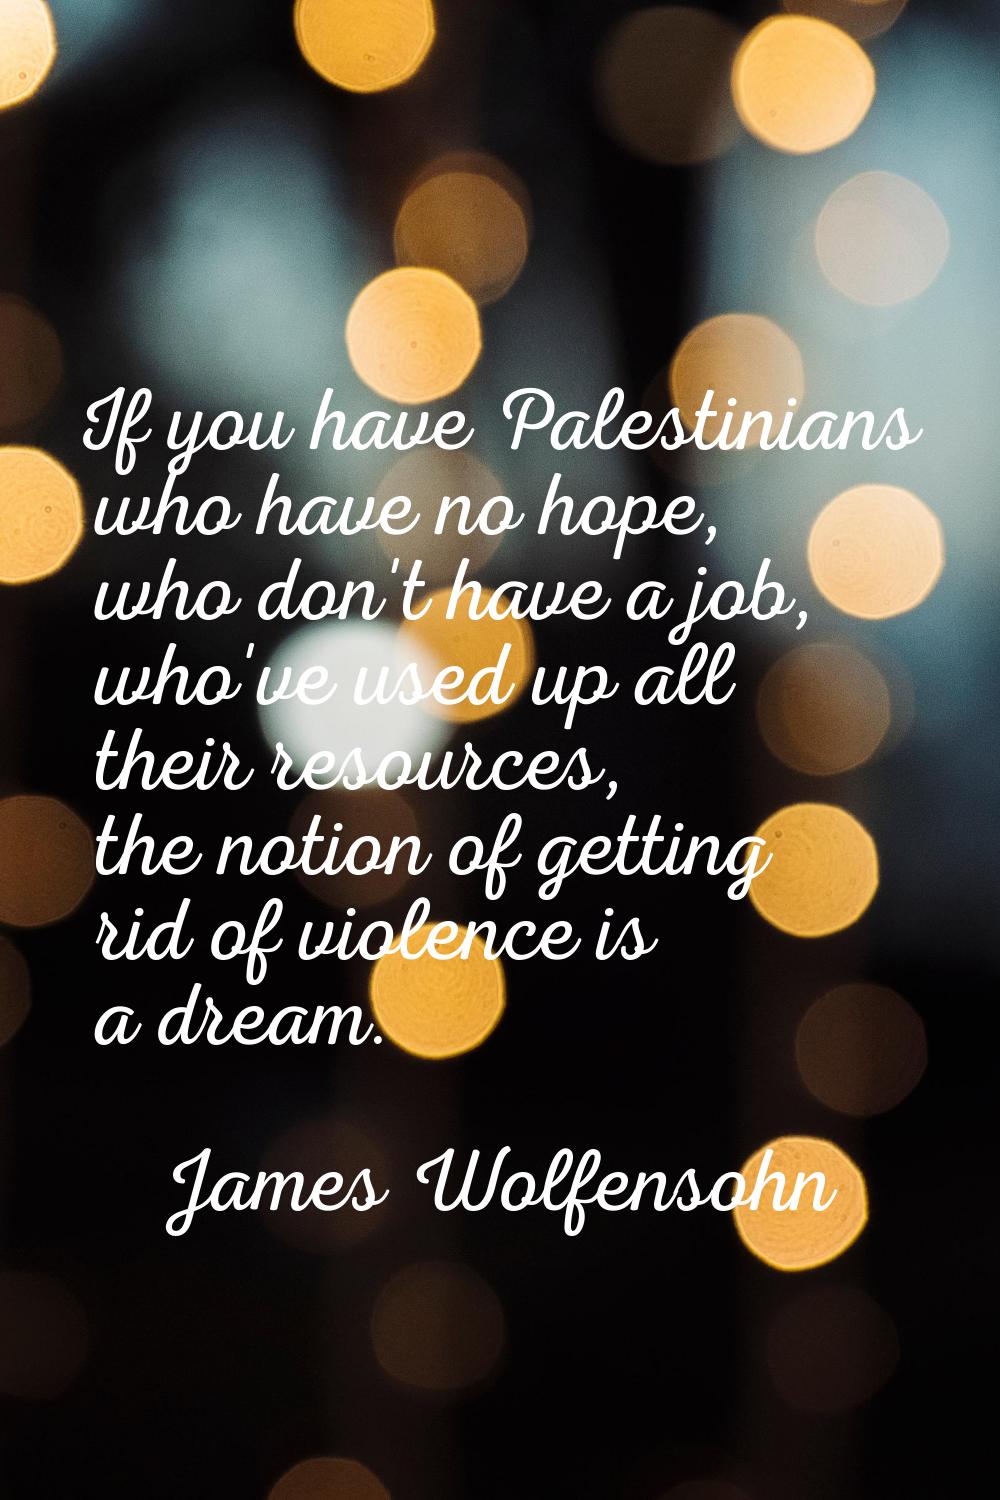 If you have Palestinians who have no hope, who don't have a job, who've used up all their resources